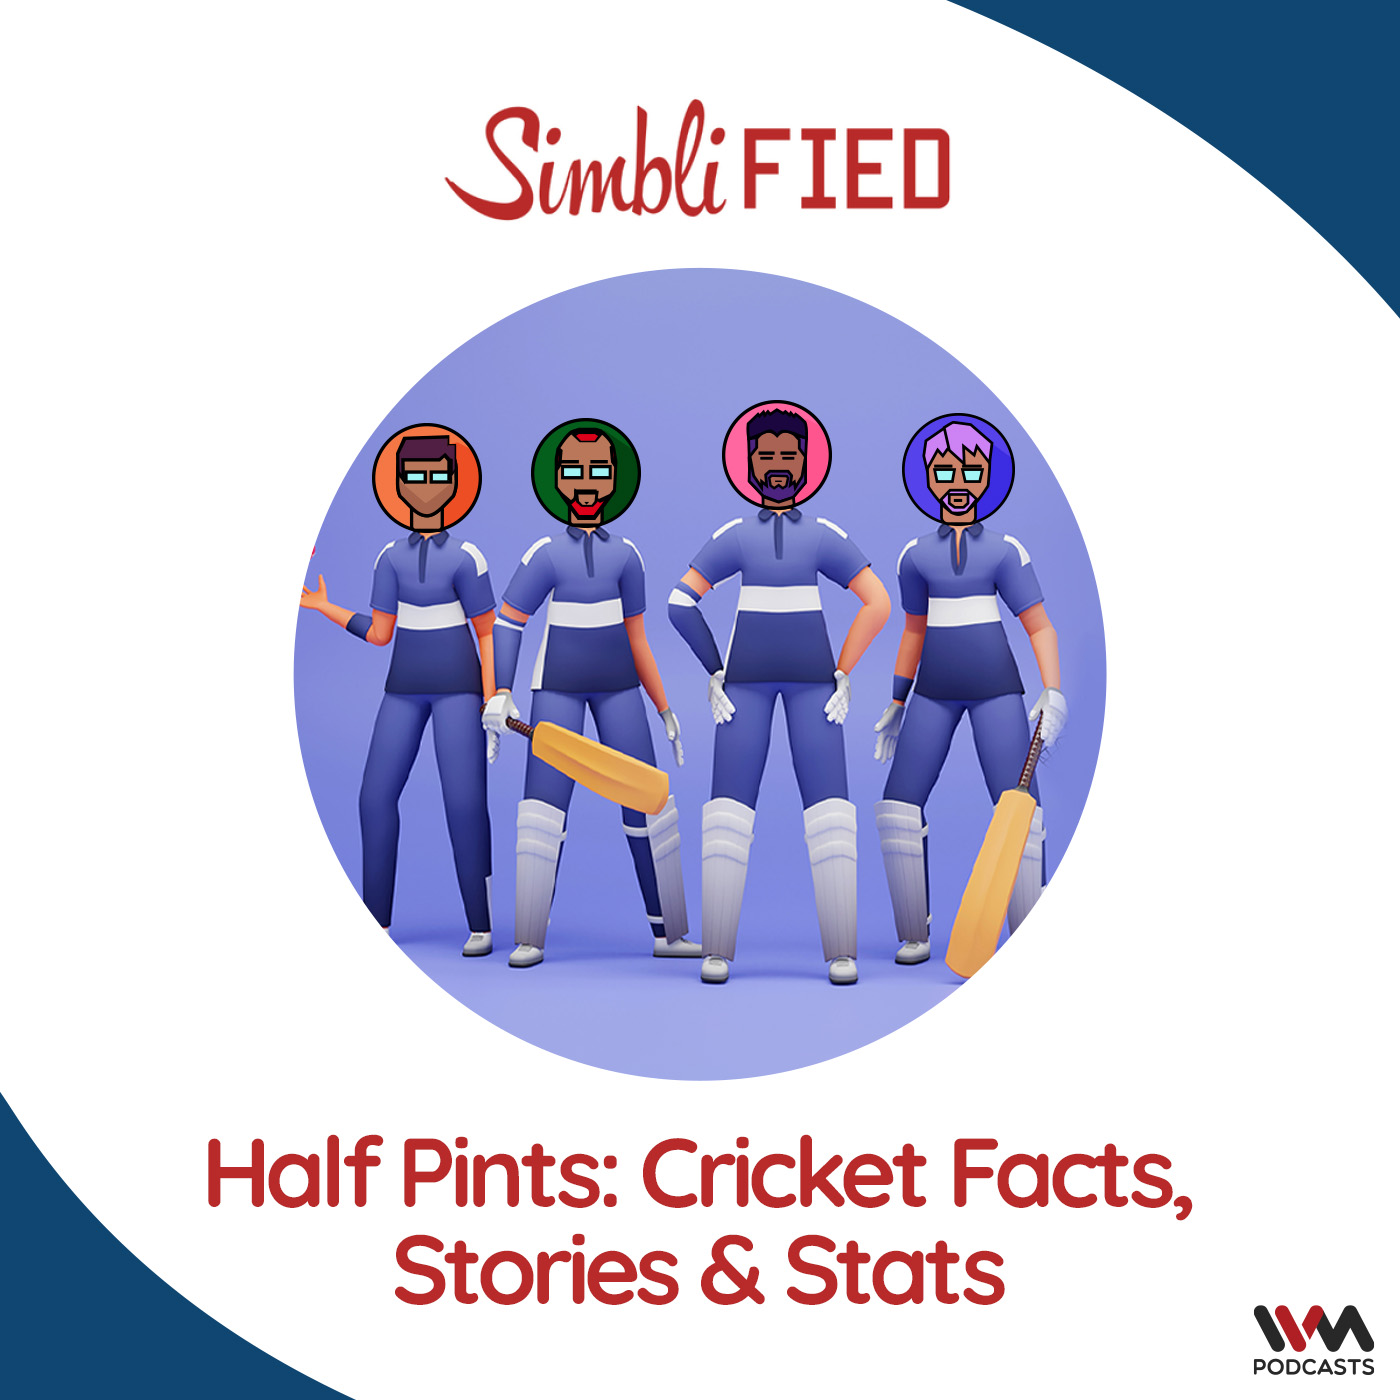 Half pints: Cricket facts, stories and stats